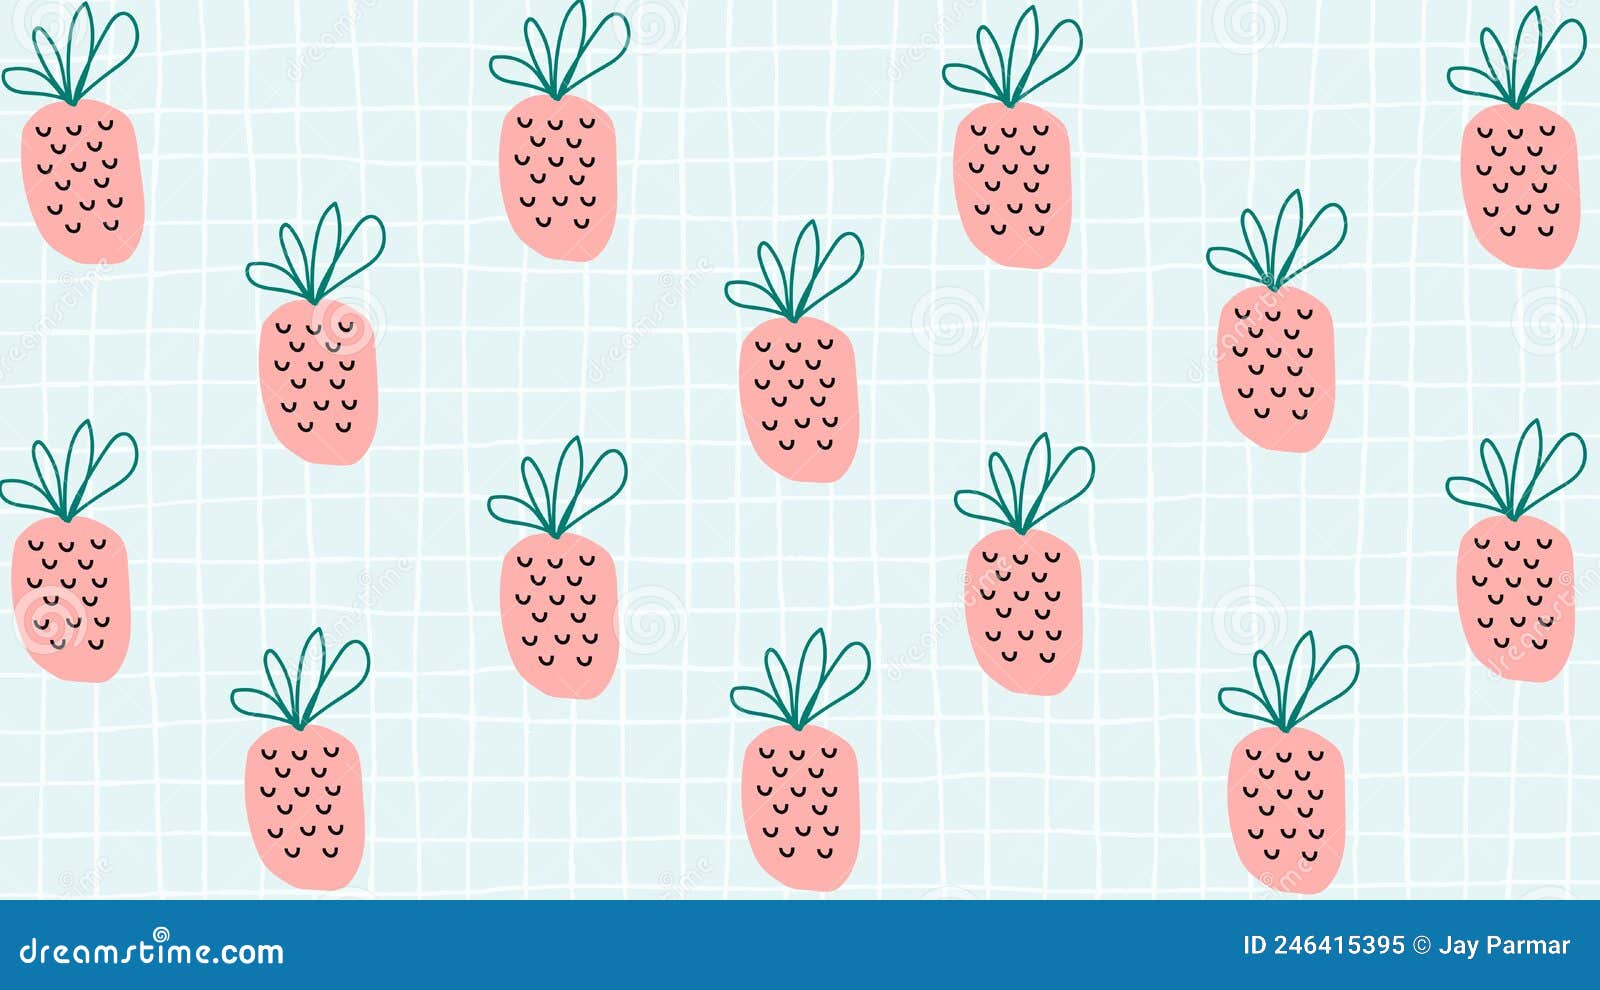 Free download Pink Pineapple Giclee 2 by thepinkpagoda on Etsy 3000  570x833 for your Desktop Mobile  Tablet  Explore 50 Pink Pineapple  Wallpaper  Pineapple Wallpaper Patterns Pineapple Express Wallpaper  Pineapple Phone Wallpaper